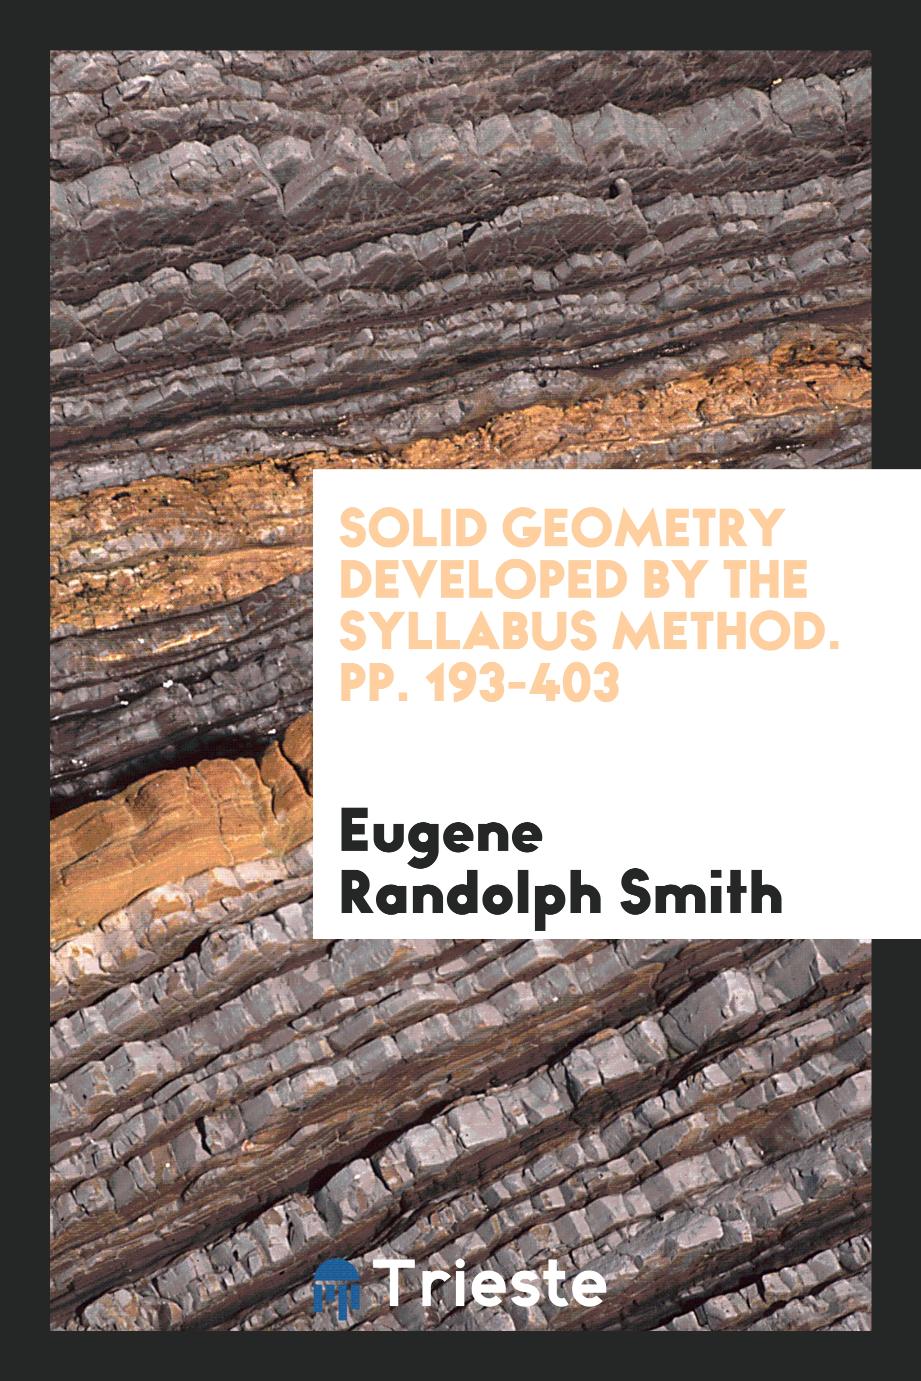 Solid geometry developed by the syllabus method. pp. 193-403